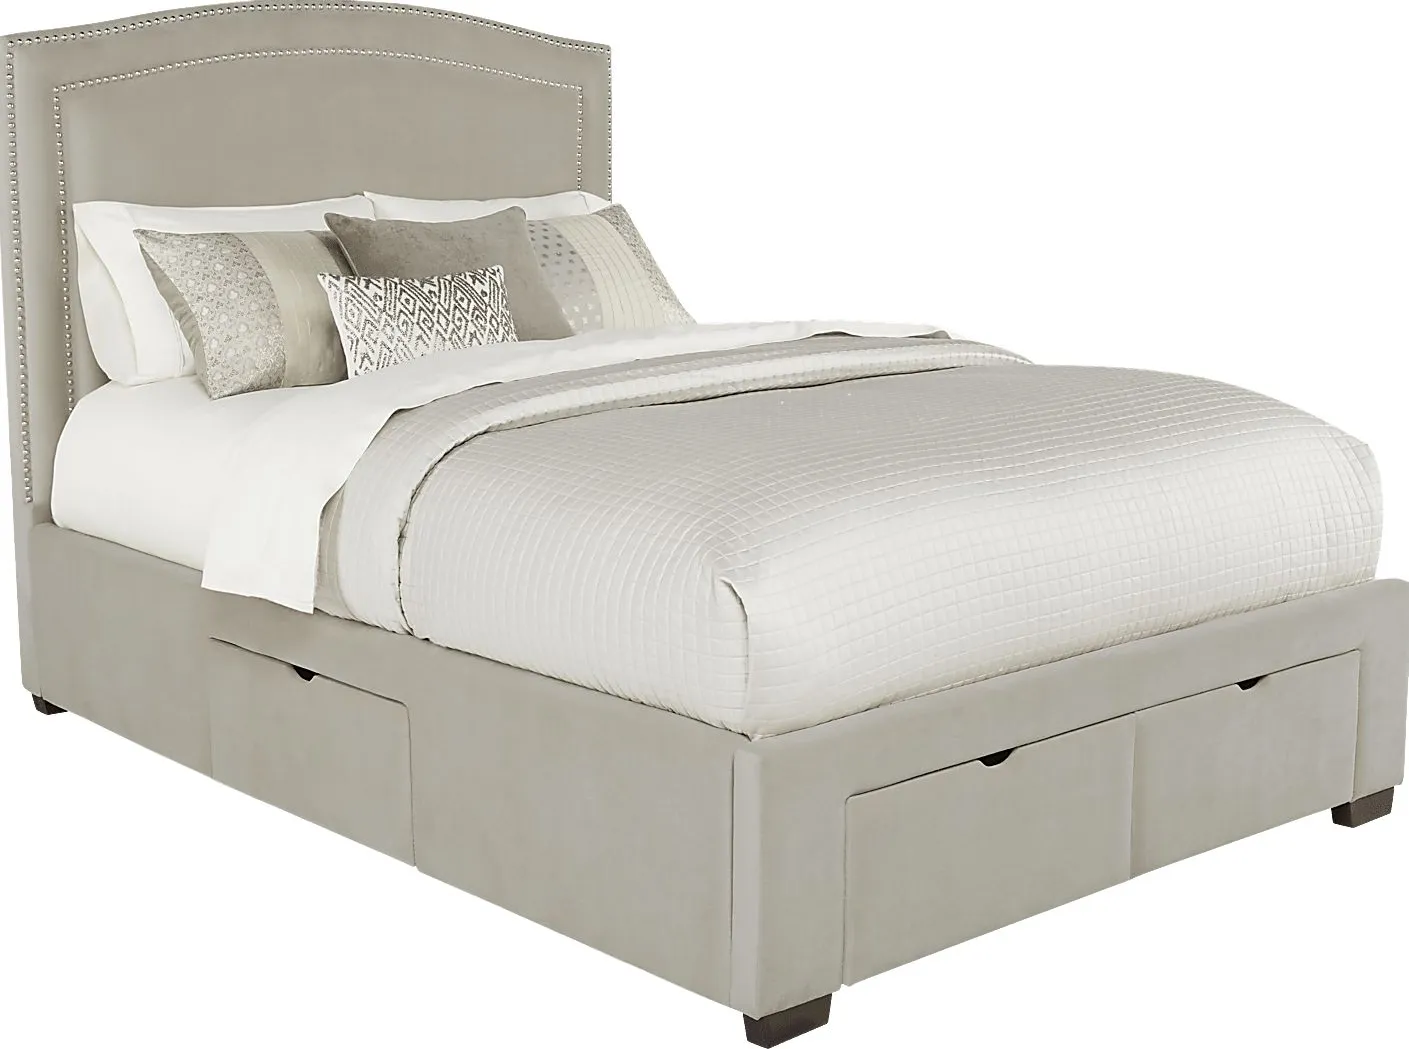 Loden Beige 3 Pc King Upholstered Bed with 4 Drawer Storage